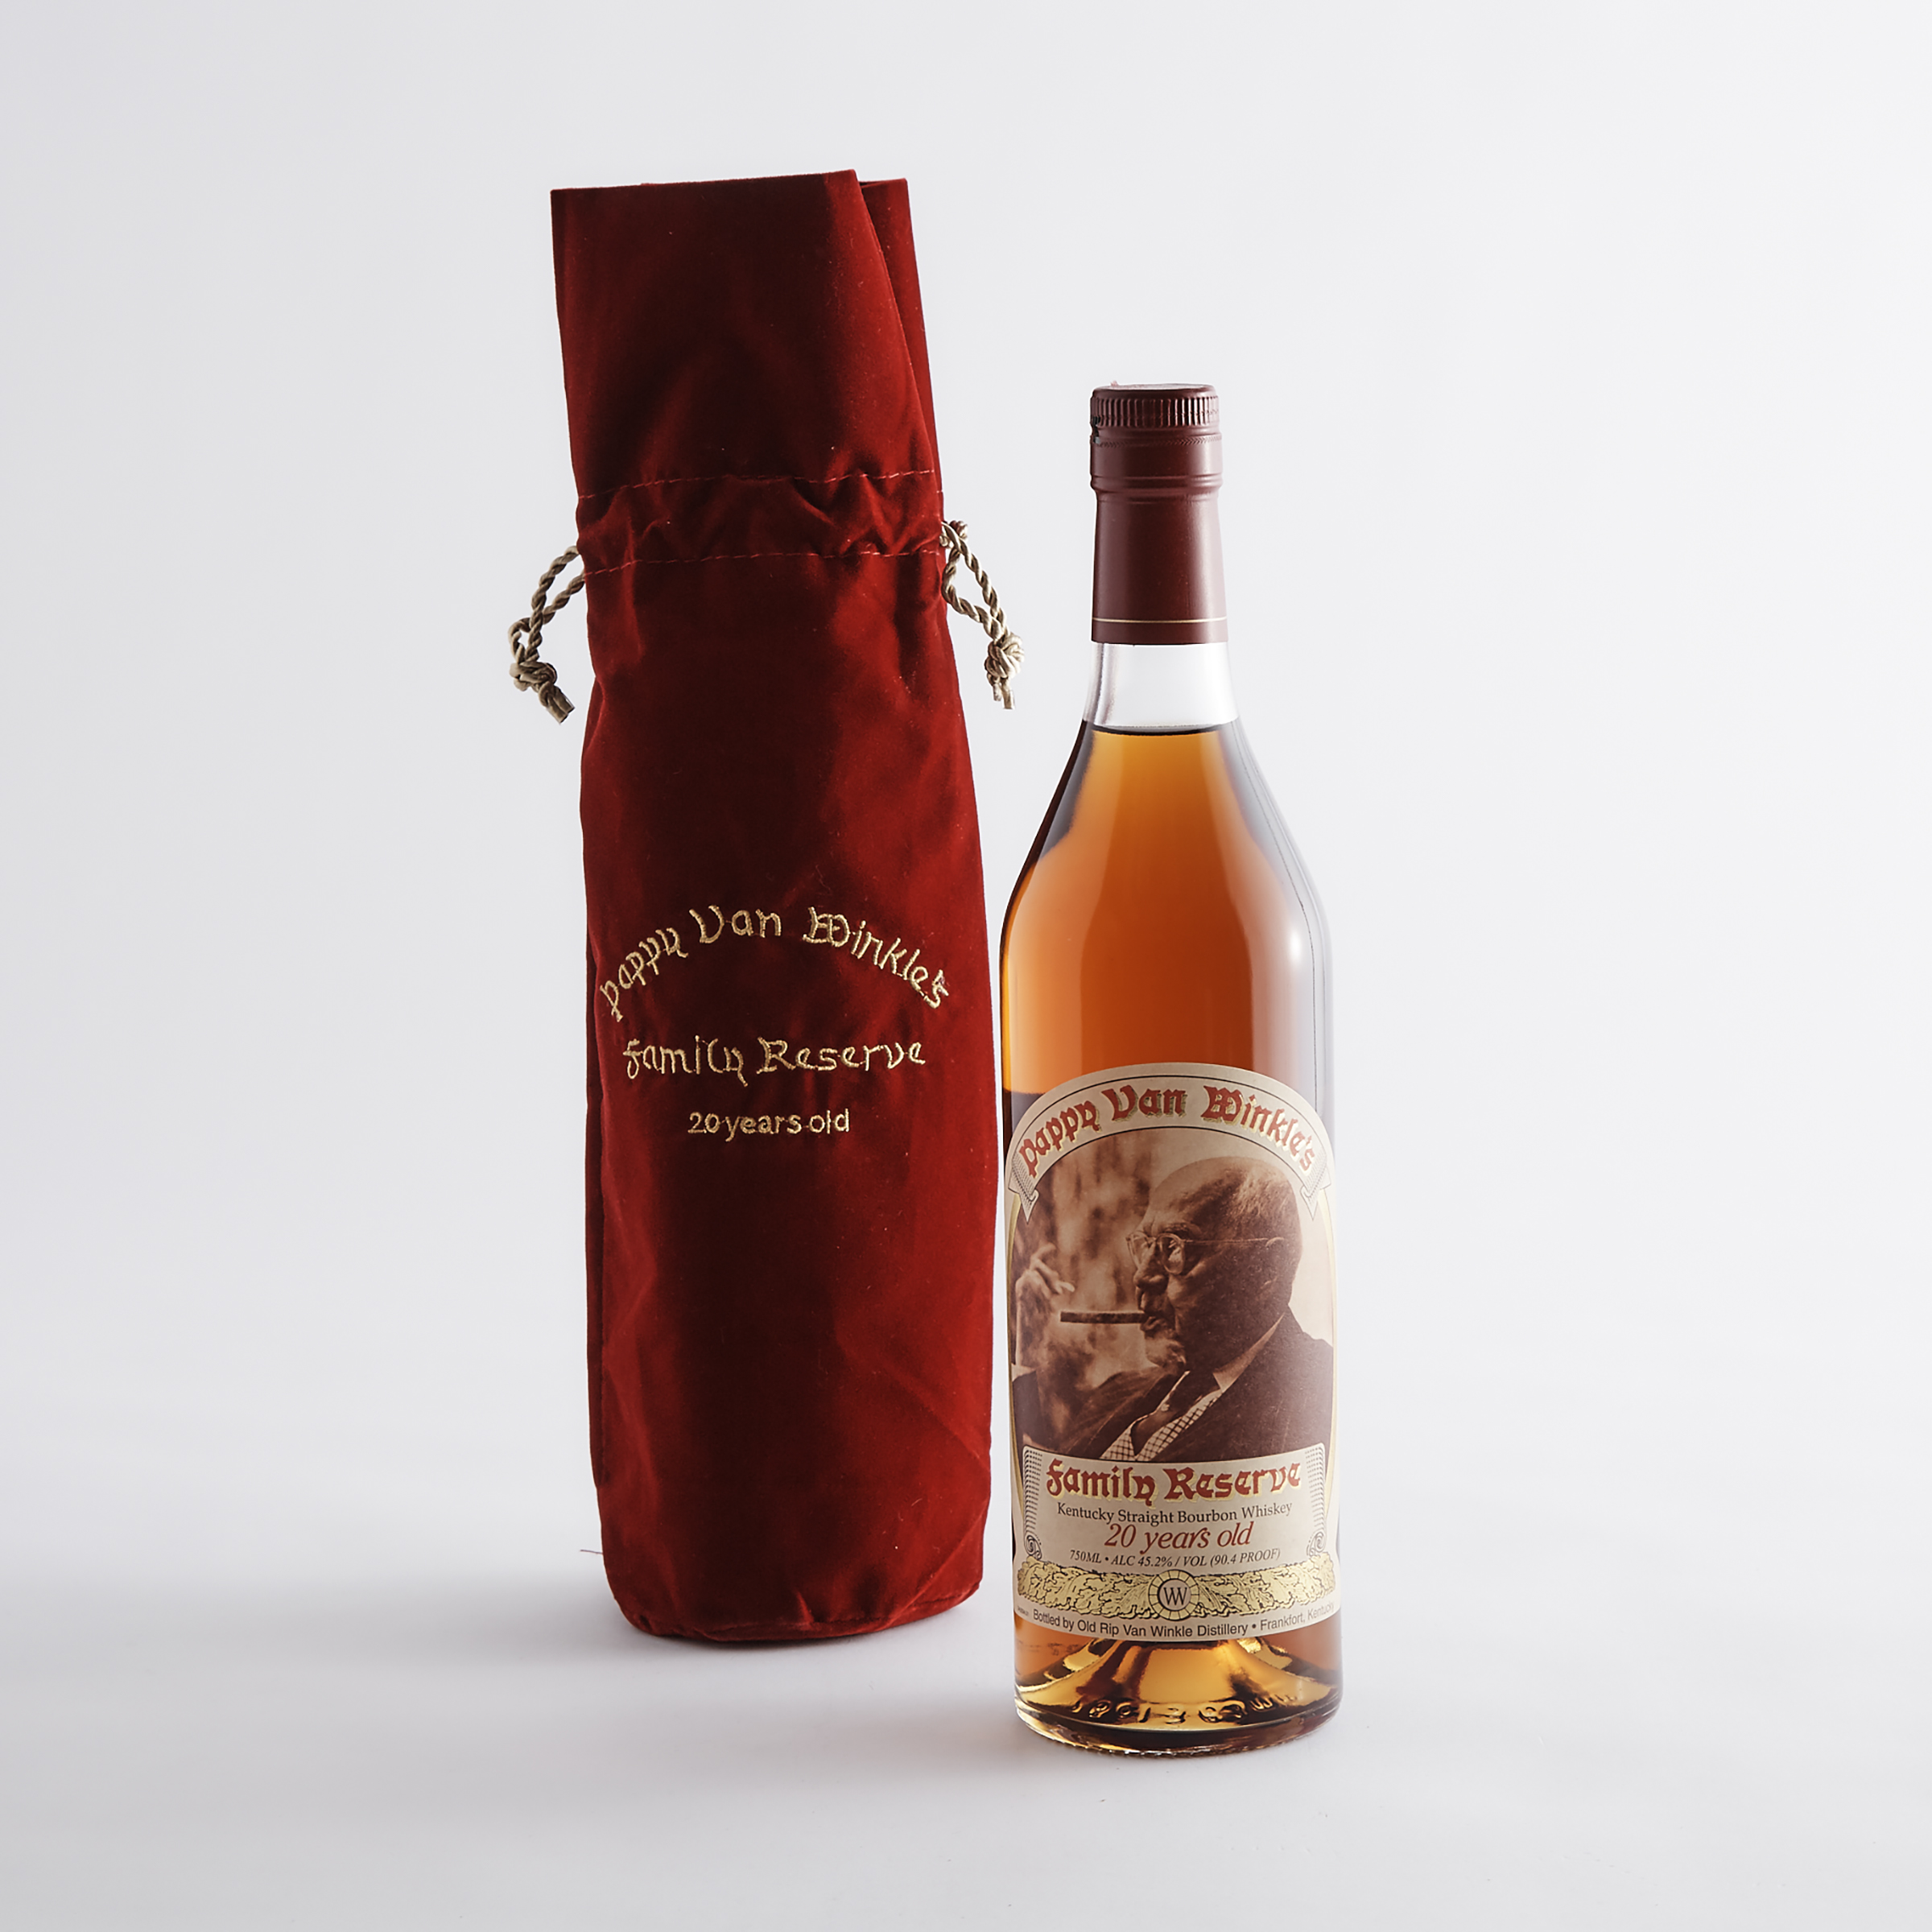 PAPPY VAN WINKLE FAMILY RESERVE KENTUCKY STRAIGHT BOURBON WHISKEY 20 YEARS (ONE 750 ML)